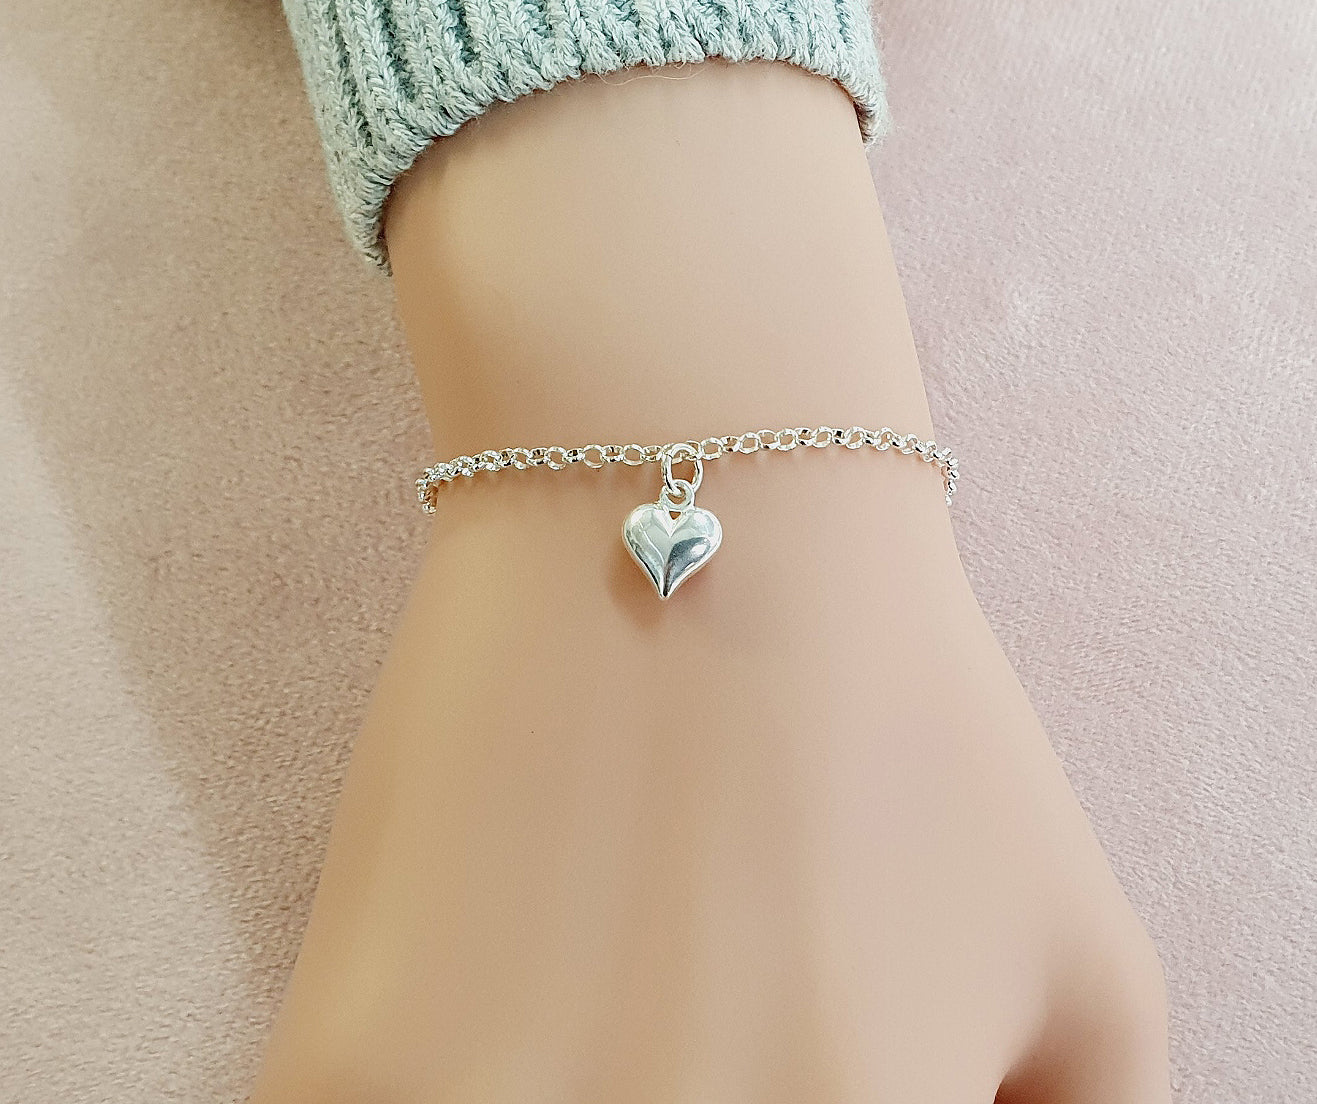 13th Birthday Puffy Heart Bracelet in Sterling Silver 925, Personalised Gift